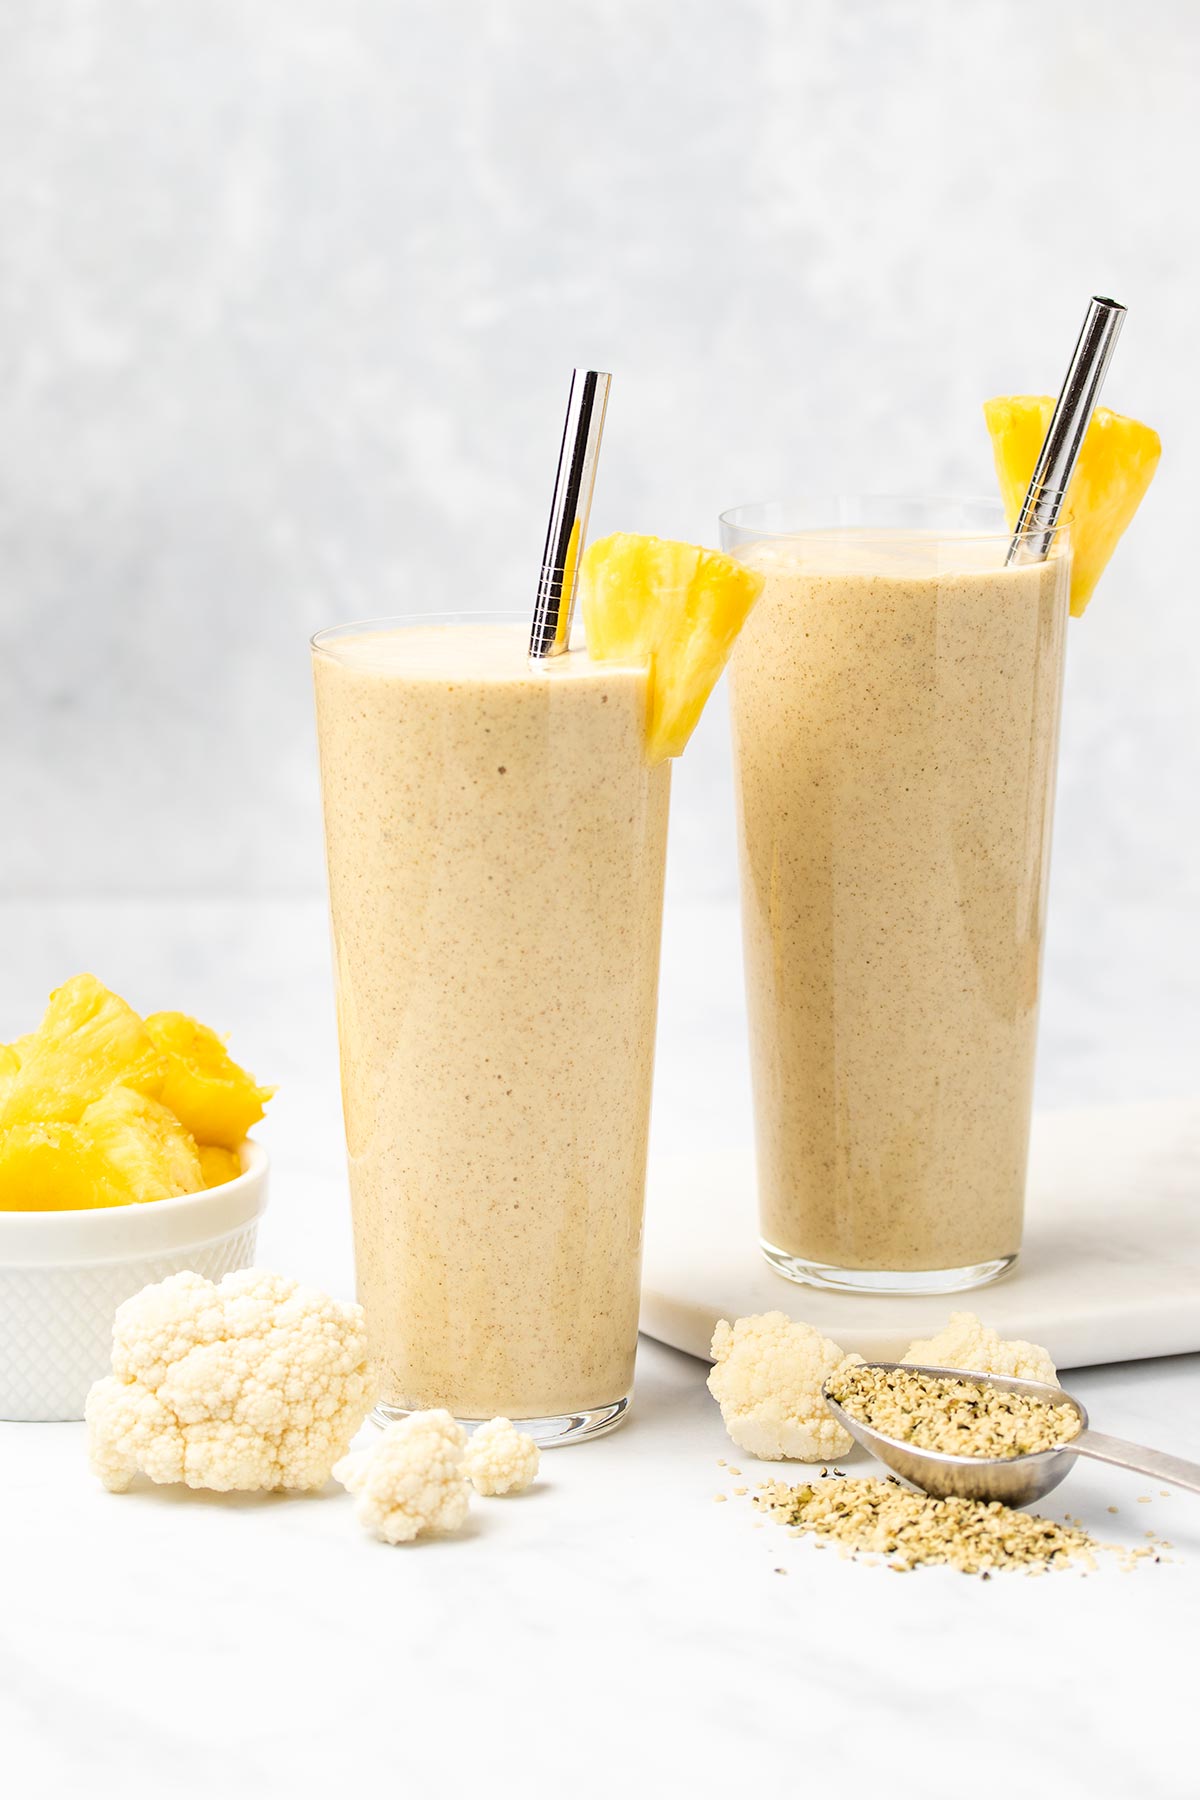 Two glasses of cauliflower smoothie garnished with pineapple and a silver straw surrounded by cauliflower florets, hemp hearts and a white bowl of diced pineapple